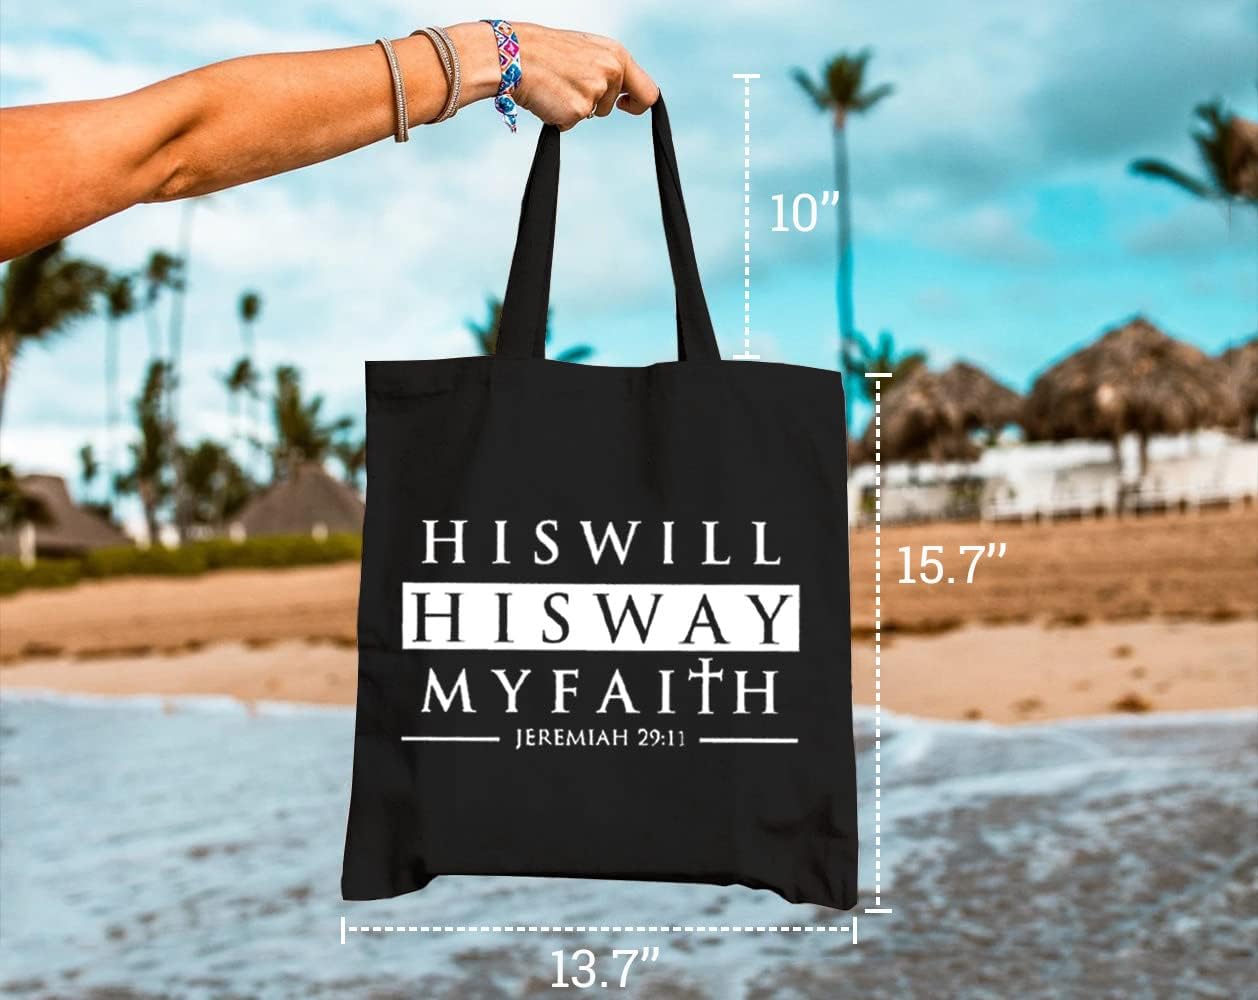 His Will His Way My Faith Christian Tote Bag claimedbygoddesigns